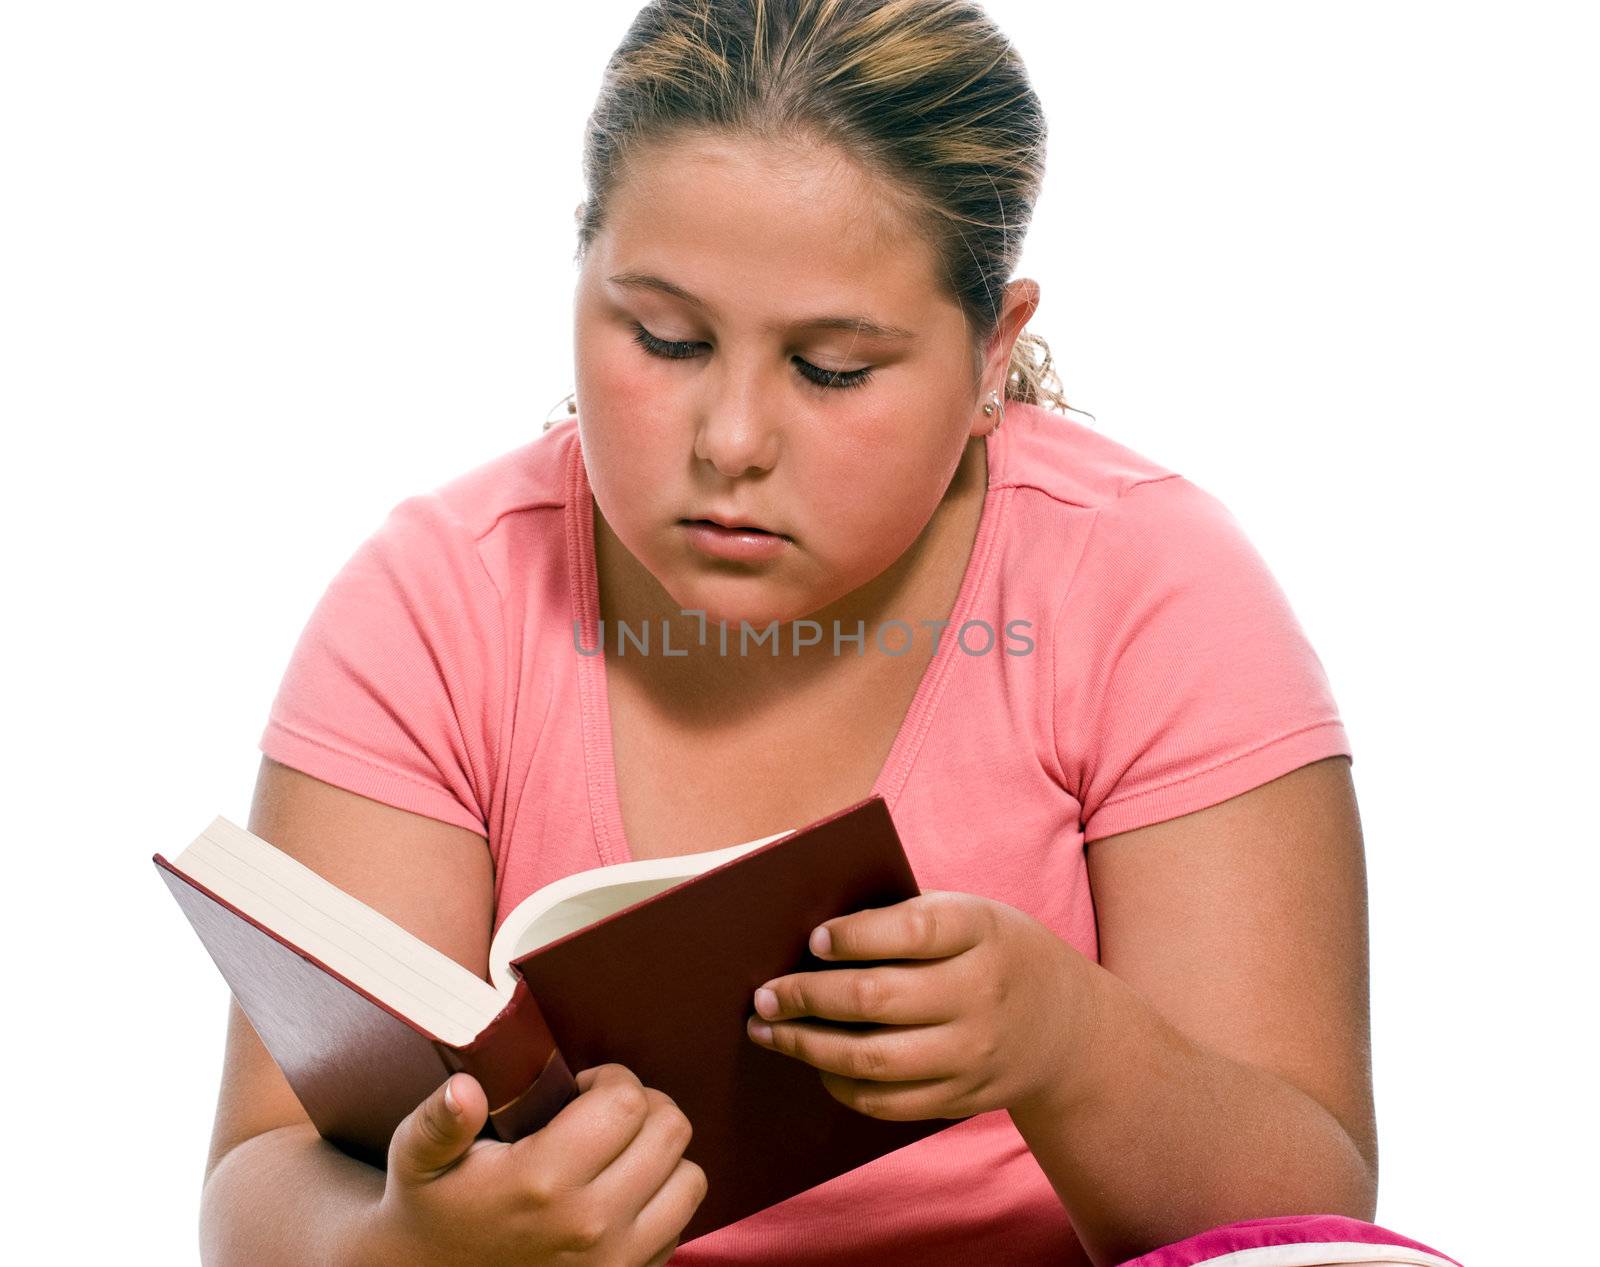 A young girl reading a book, isolated against a white background